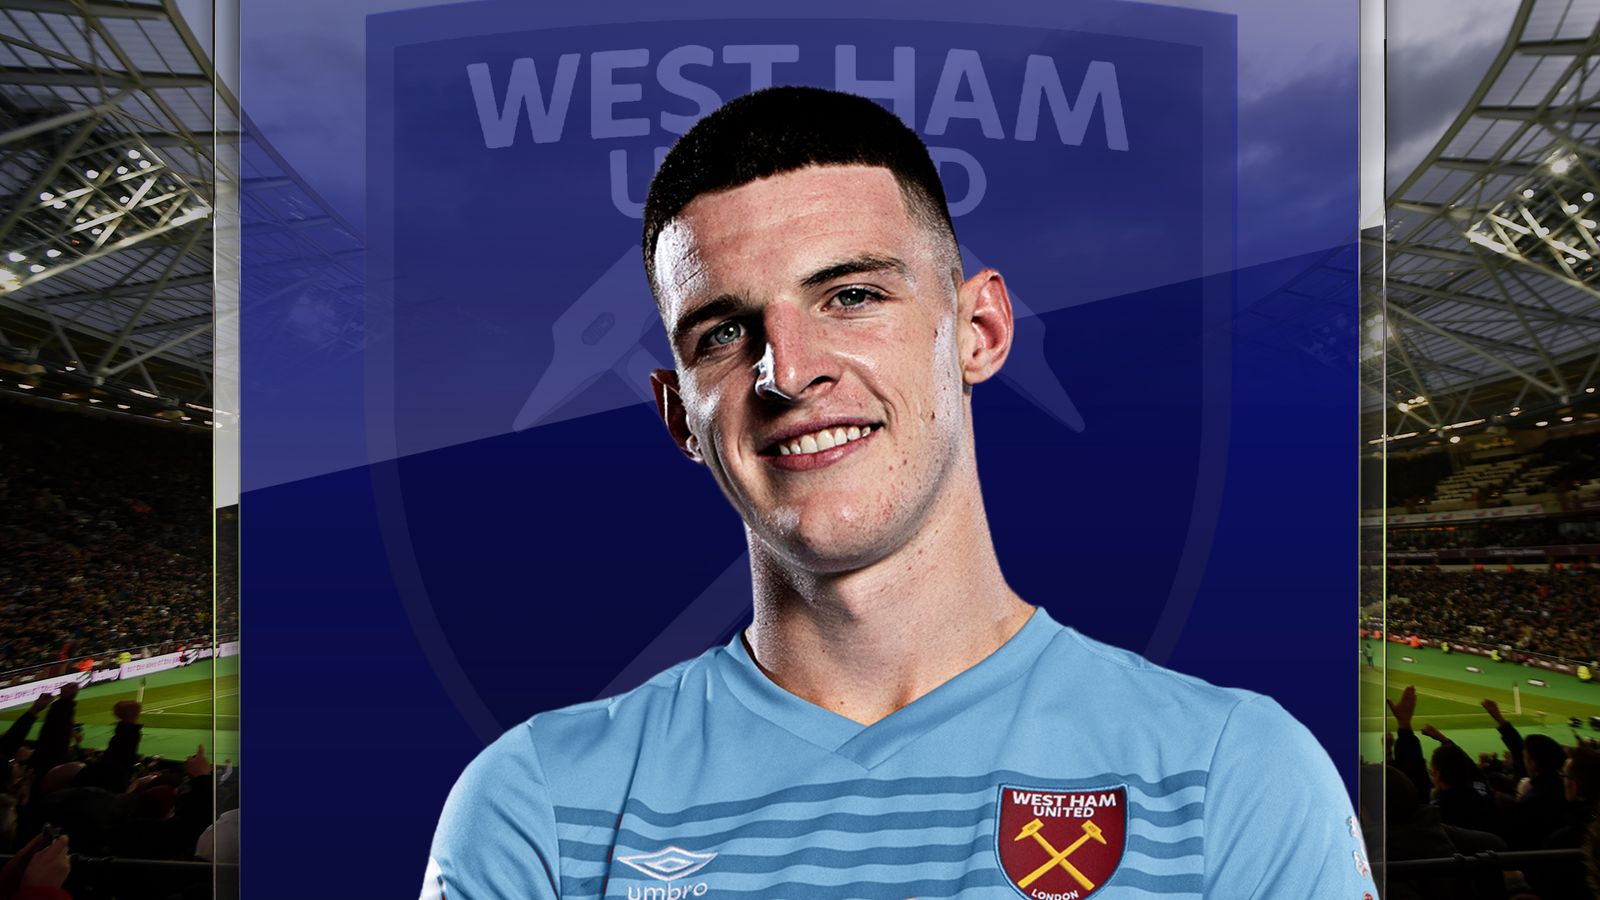 West Ham United player of the season: Declan Rice wins your vote